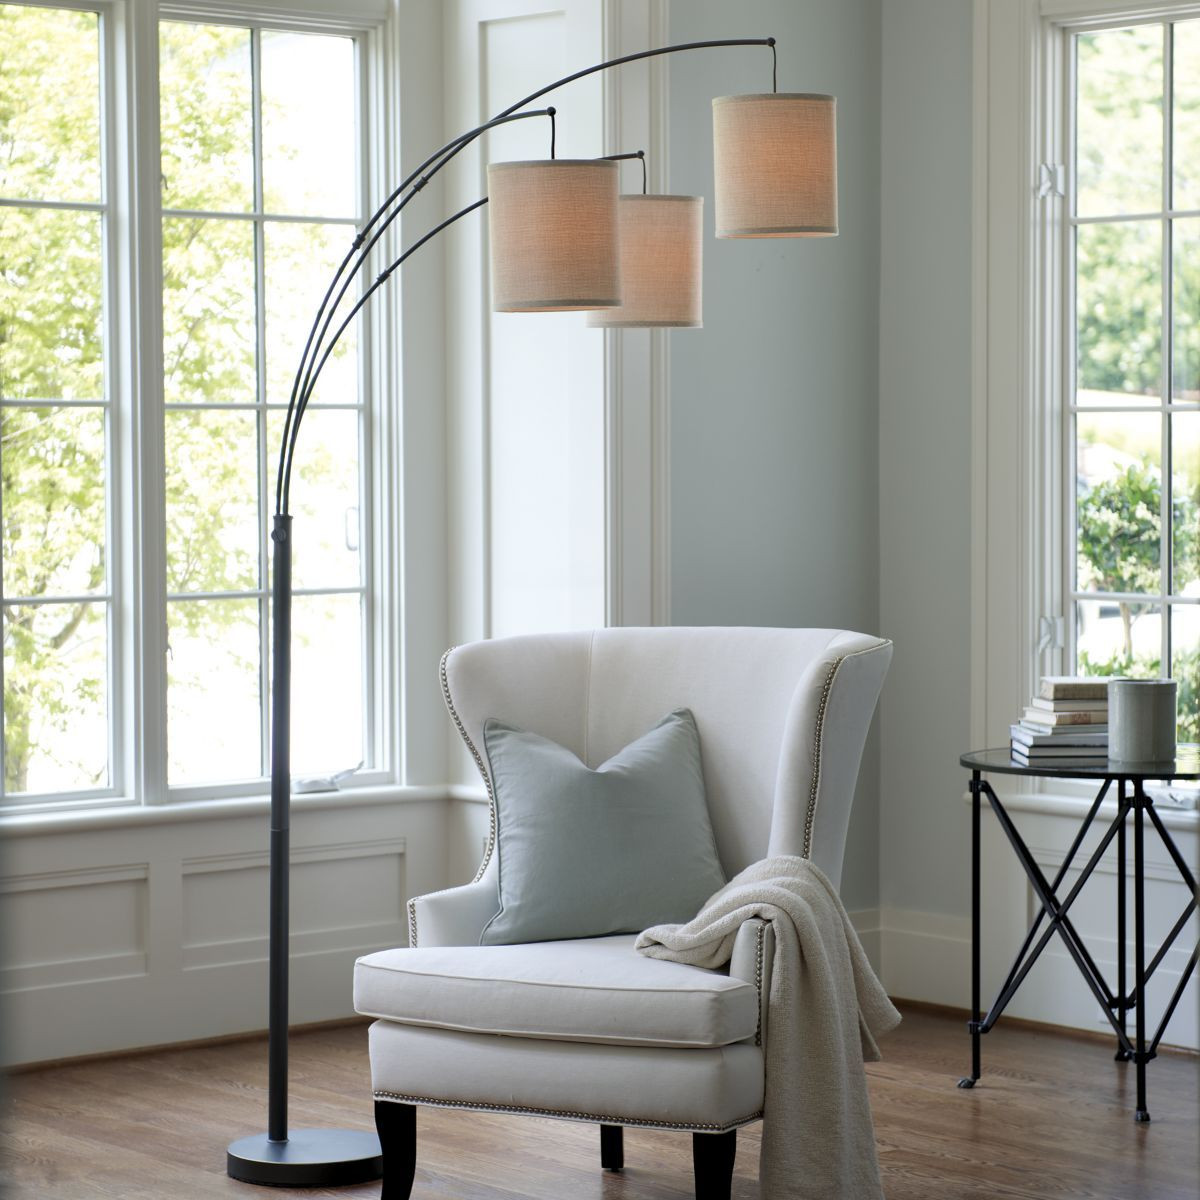 24 Perfect Living Room Arc Floor Lamps - Home, Decoration, Style and